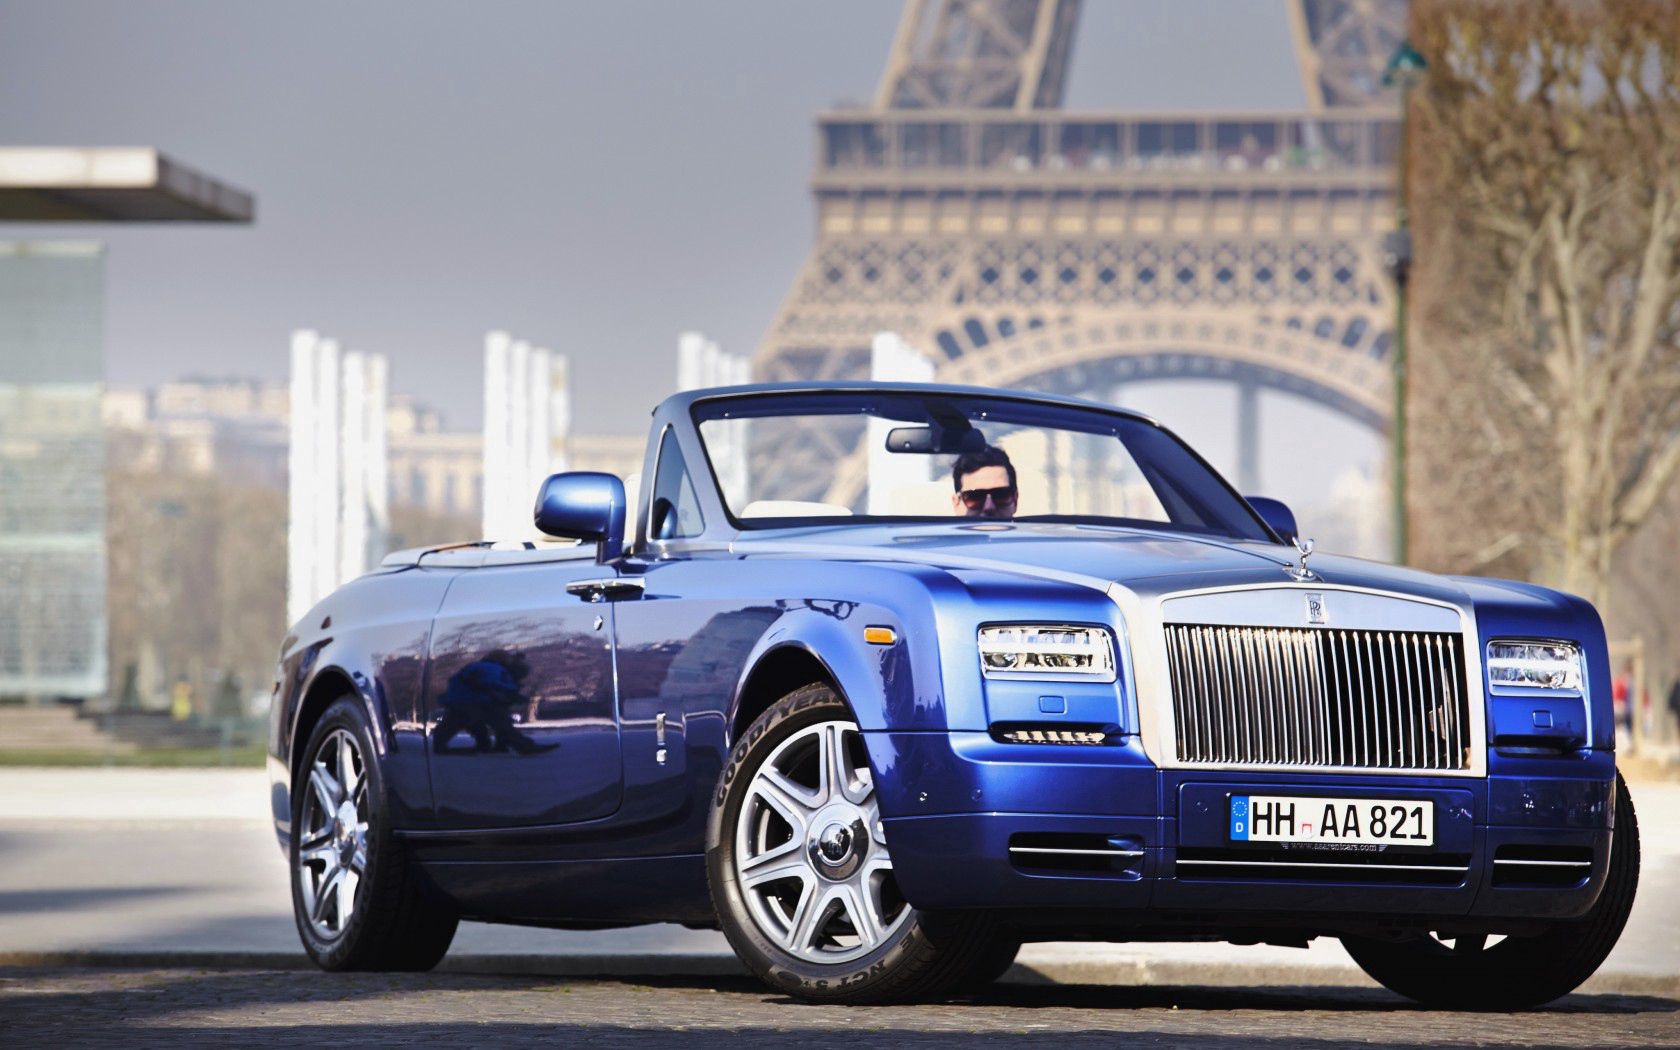 128539 Screensavers and Wallpapers Cabriolet for phone. Download rolls-royce, cars, blue, side view, cabriolet, phantom pictures for free